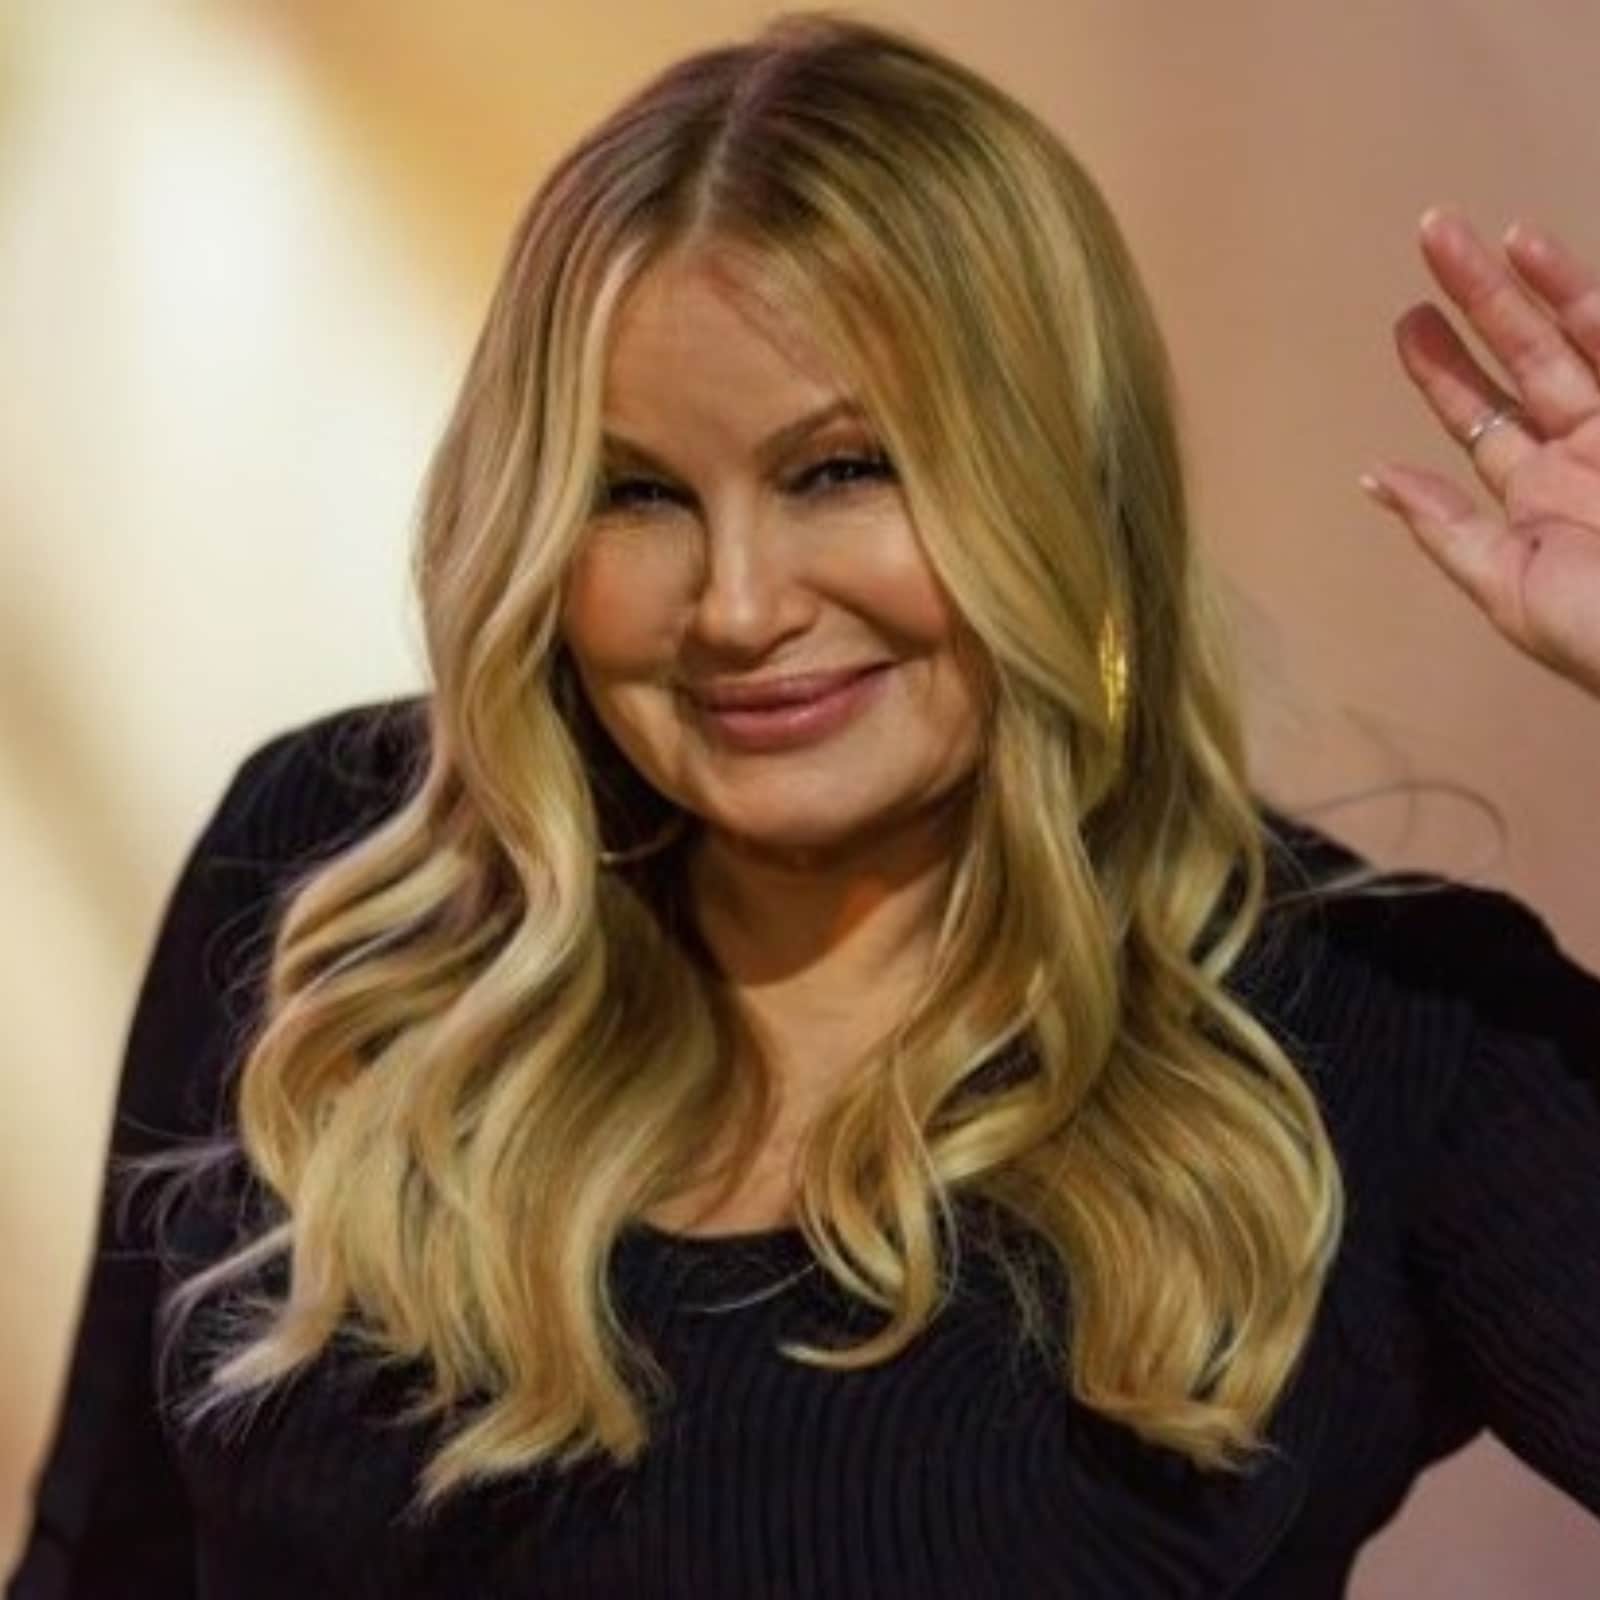 Fuck Patani - Jennifer Coolidge Admits To Sleeping With 200 People After American Pie:  'Got Lots Of Sexual Action' - News18